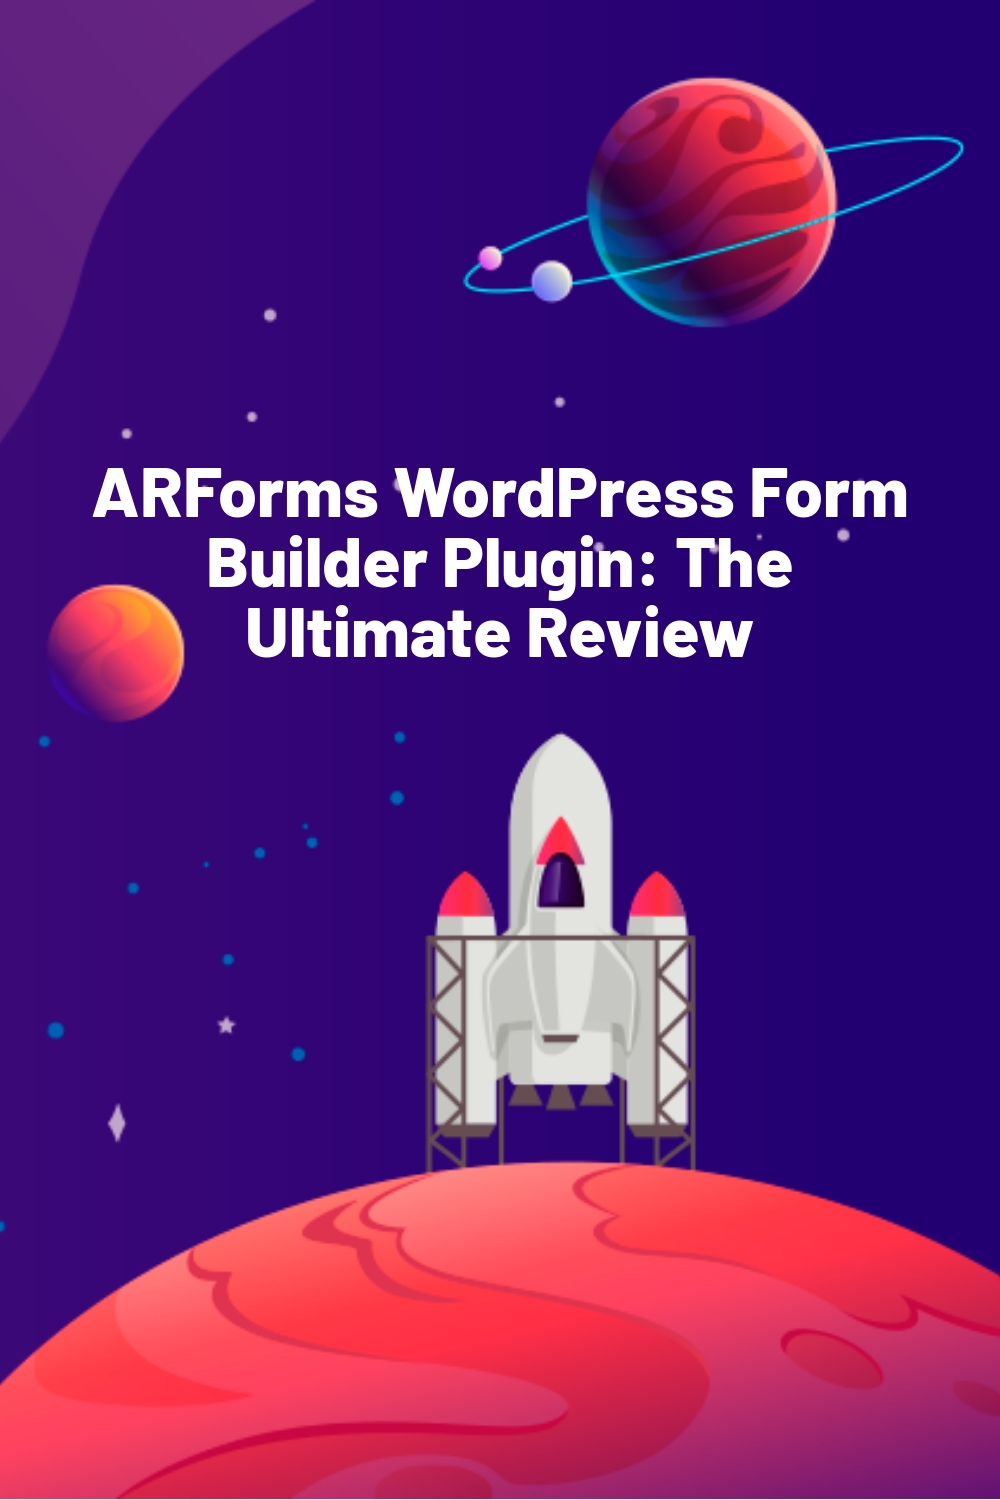 ARForms WordPress Form Builder Plugin: The Ultimate Review